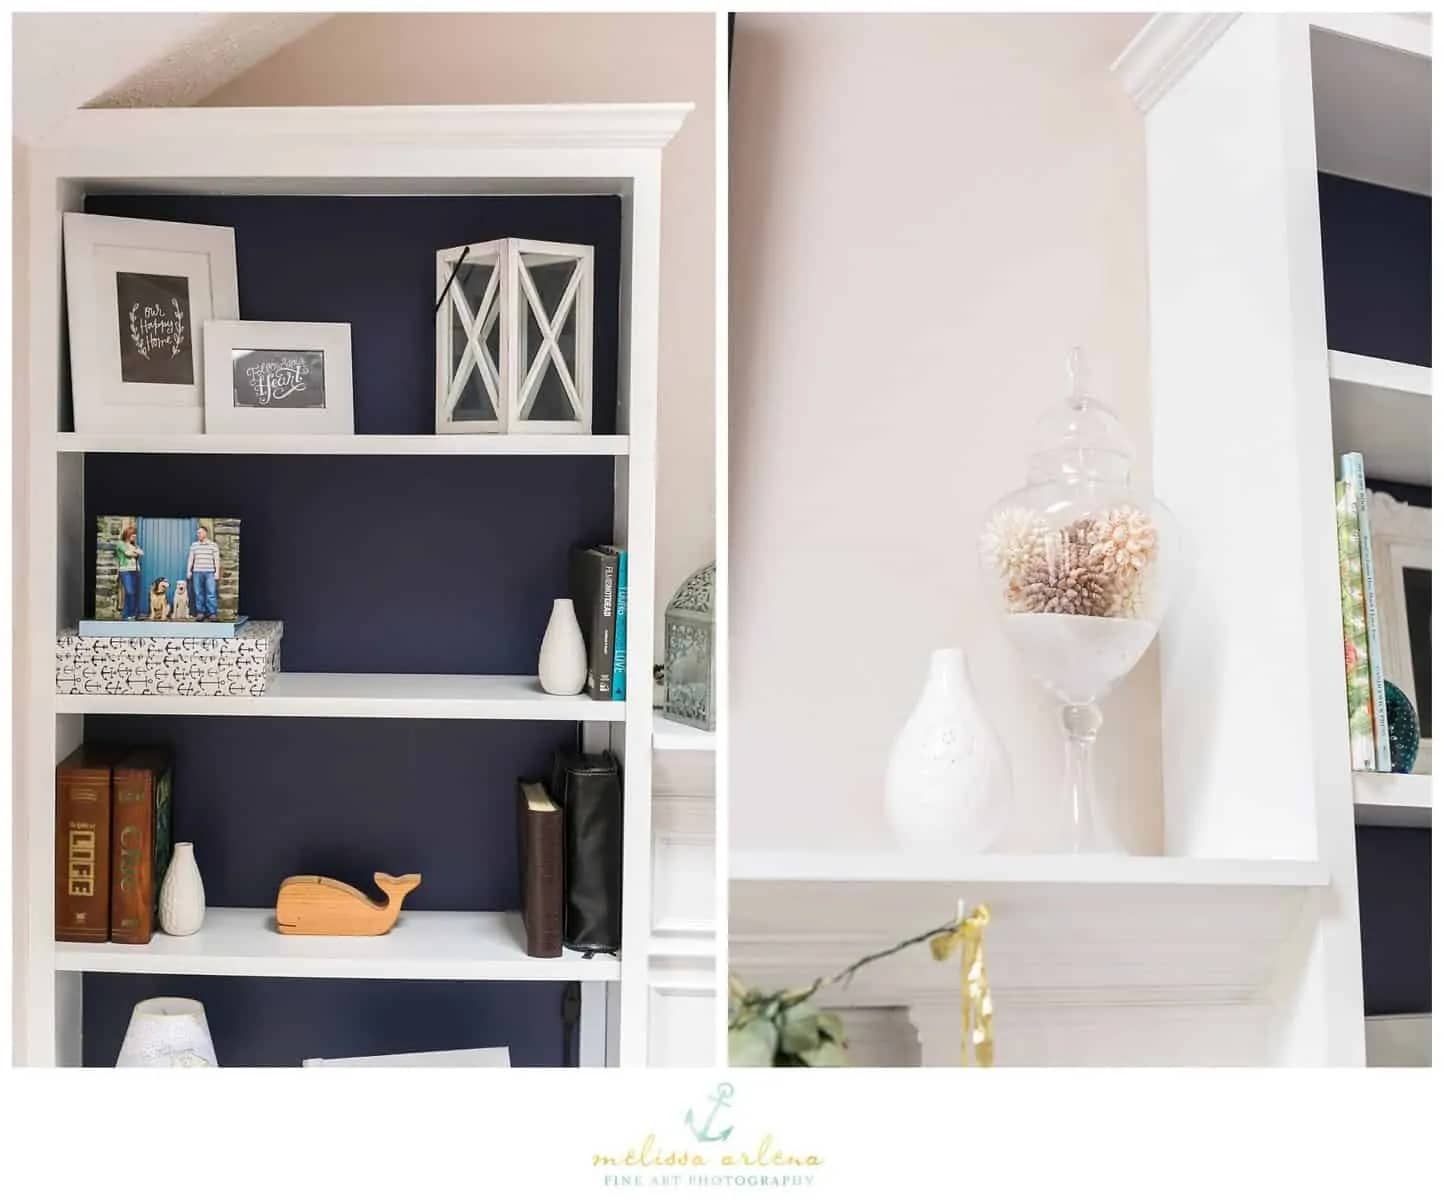 I love the crown moulding detail we added to the tops of the bookcases. I really want to get some tall chunky wooden candlesticks to go on the mantel in place of the vase I have there now. Target and Homegoods here I come!!!